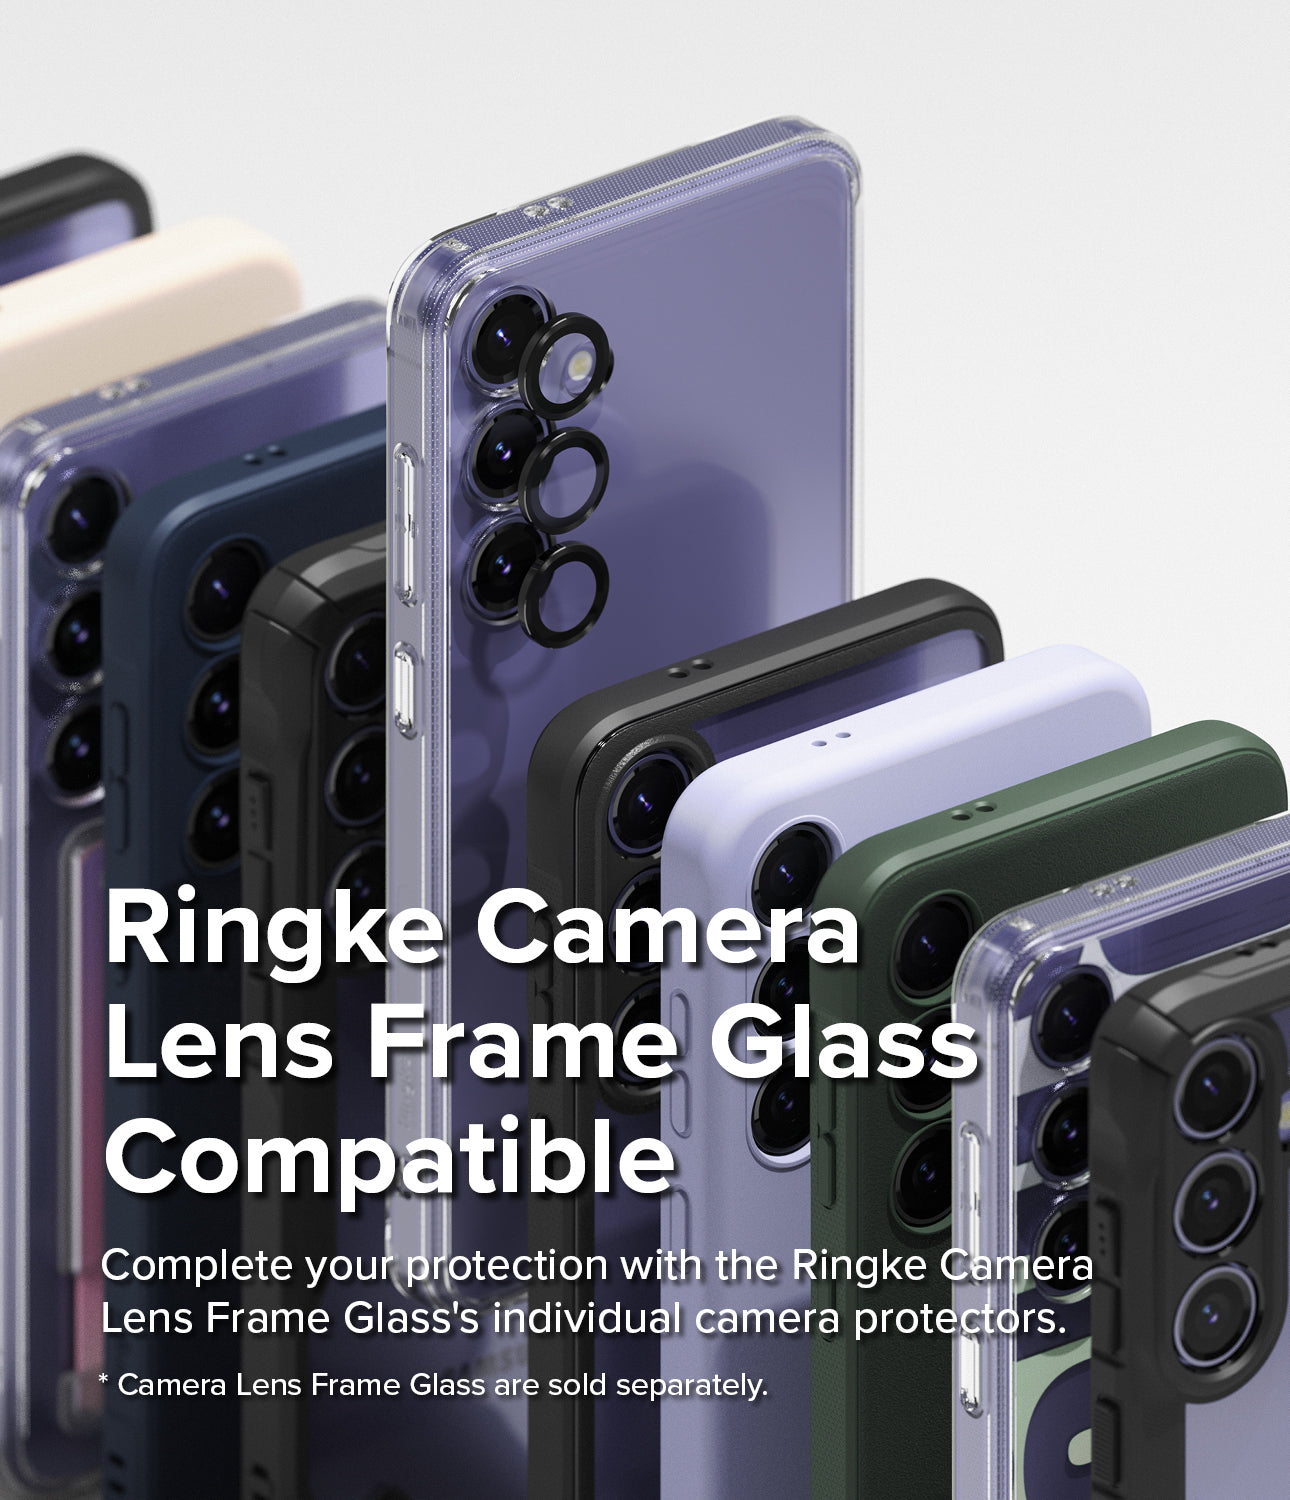 Galaxy S24 Case | Onyx Design - X - Ringke Camera Lens Frame Glass Compatible. Complete your protection with the Ringke camera Lens Frame Glass' individual camera protectors.